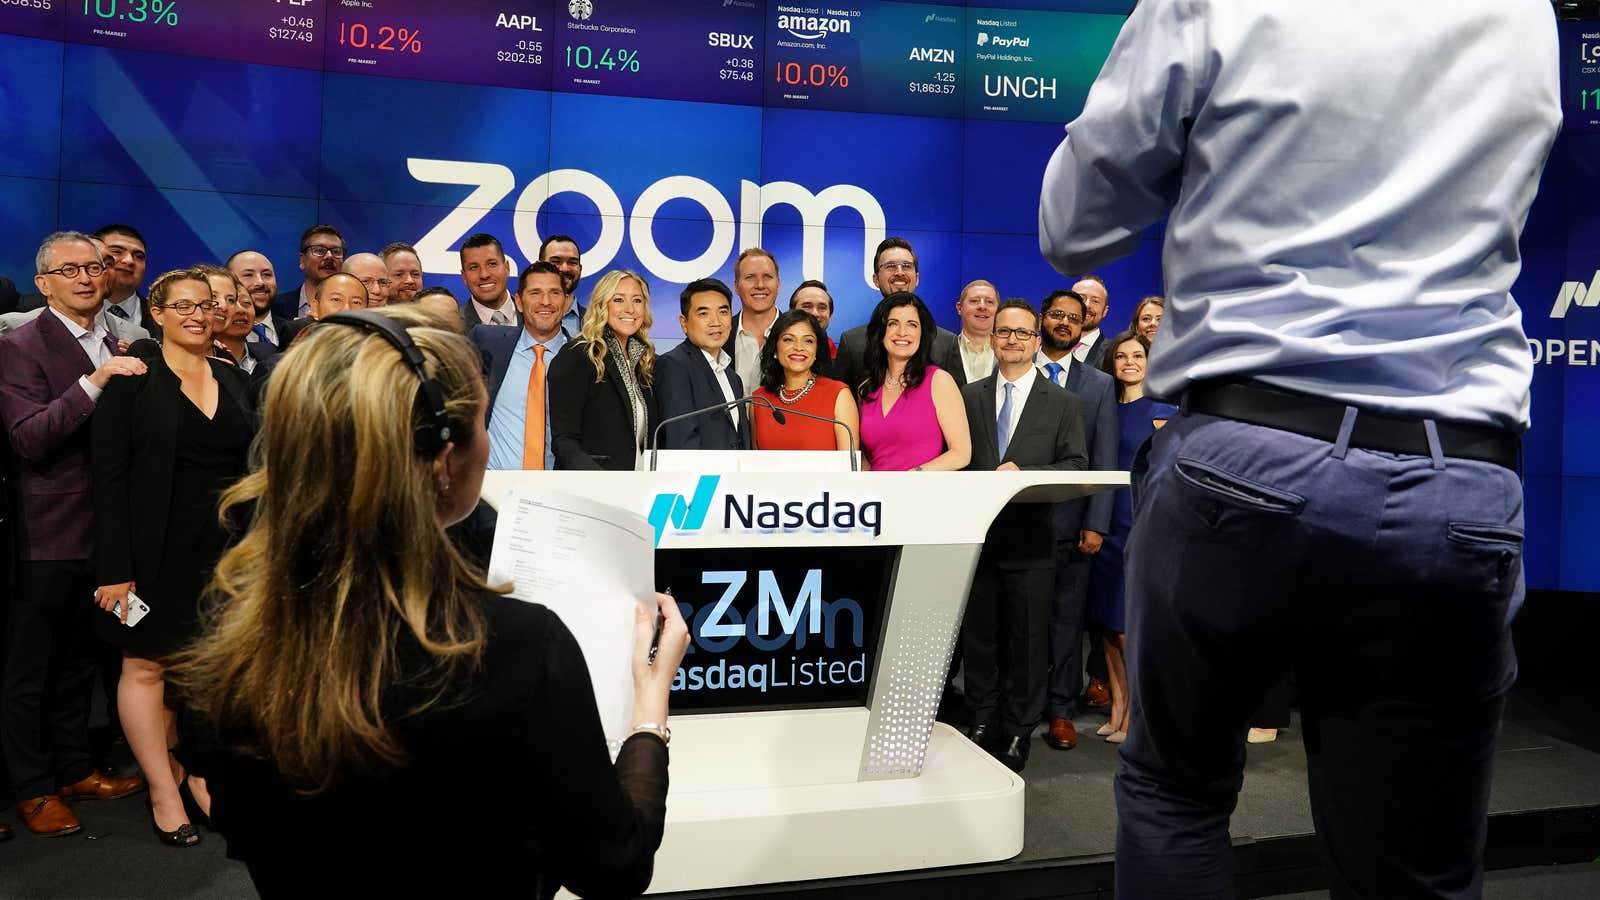 Shares of Zoom have risen over 400% since this photo was taken.